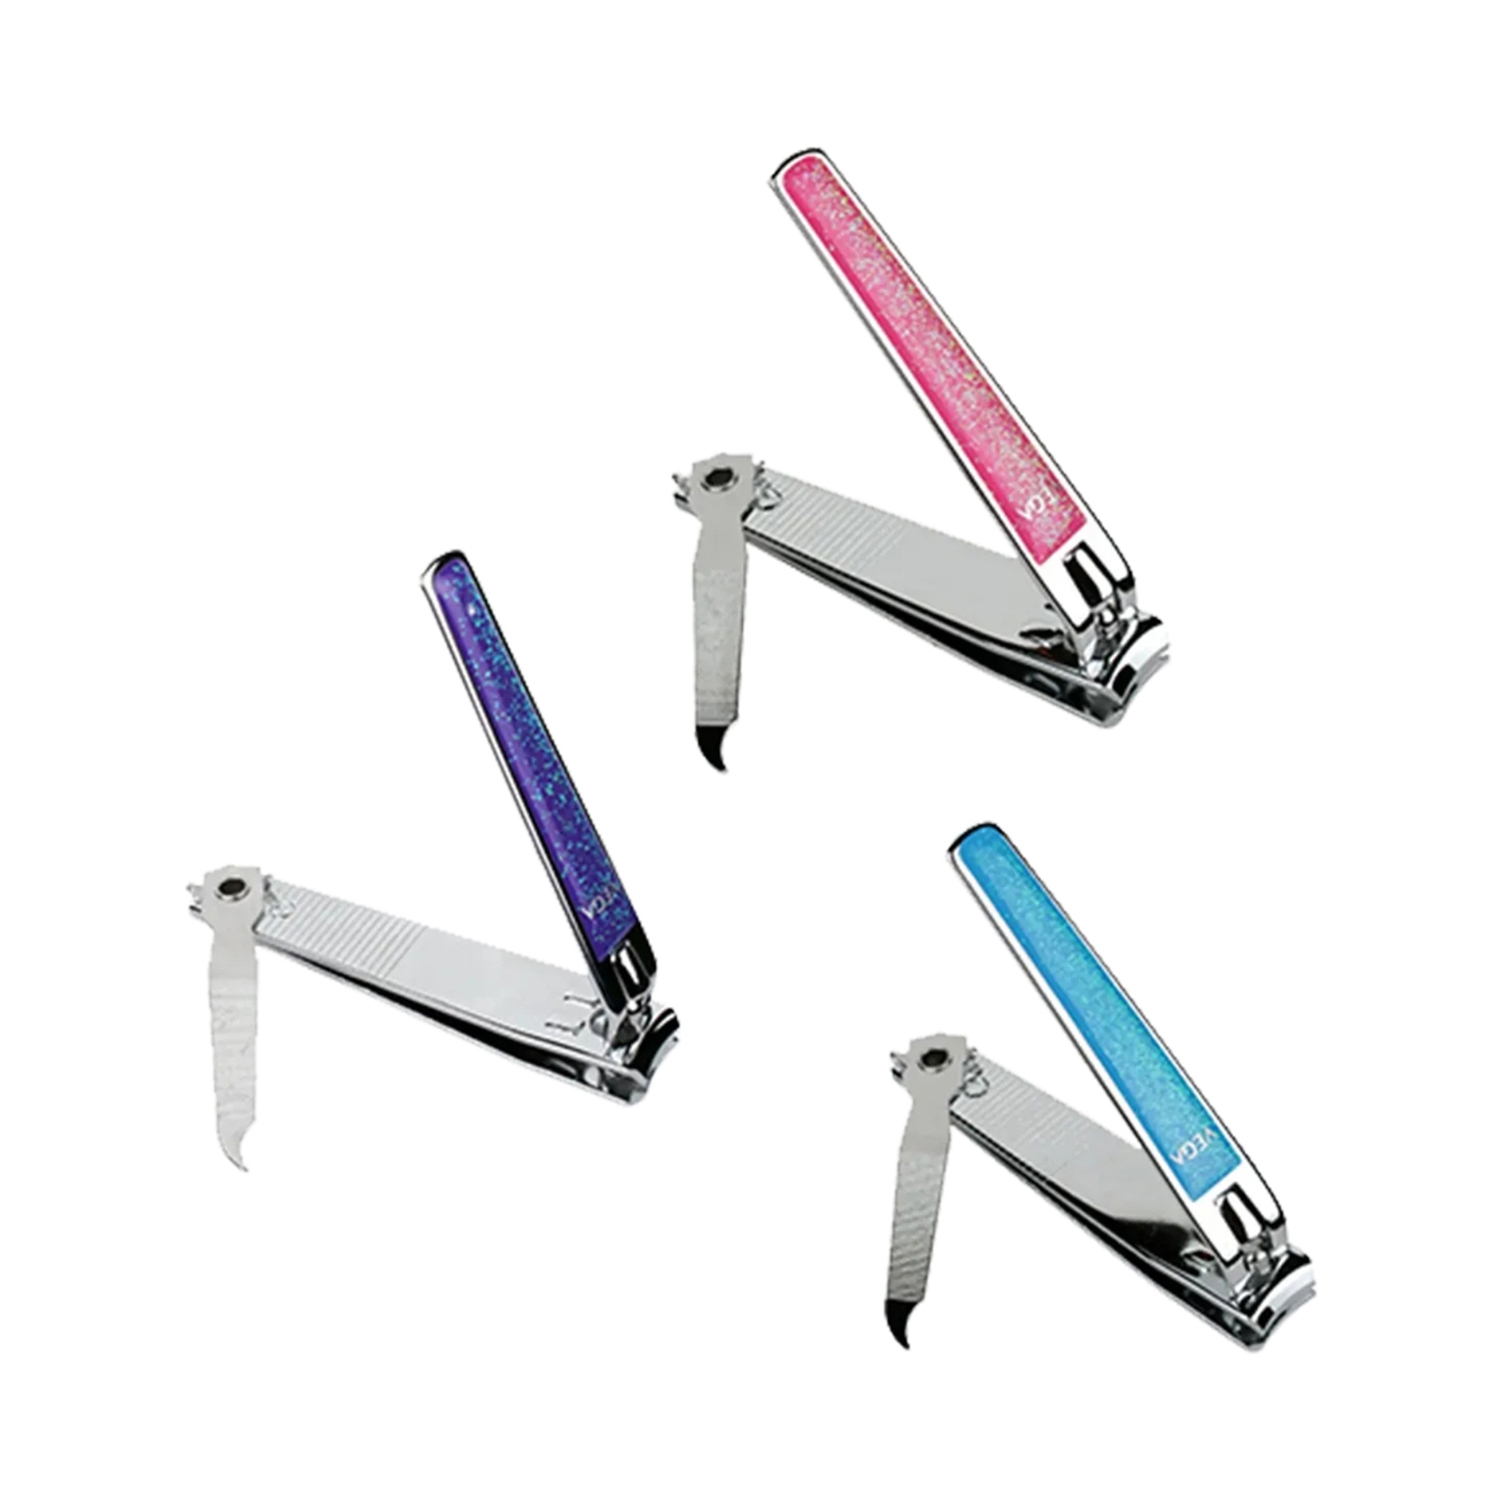 Vega Nail Clipper (Pink) - Pack of 2 Price - Buy Online at ₹228 in India